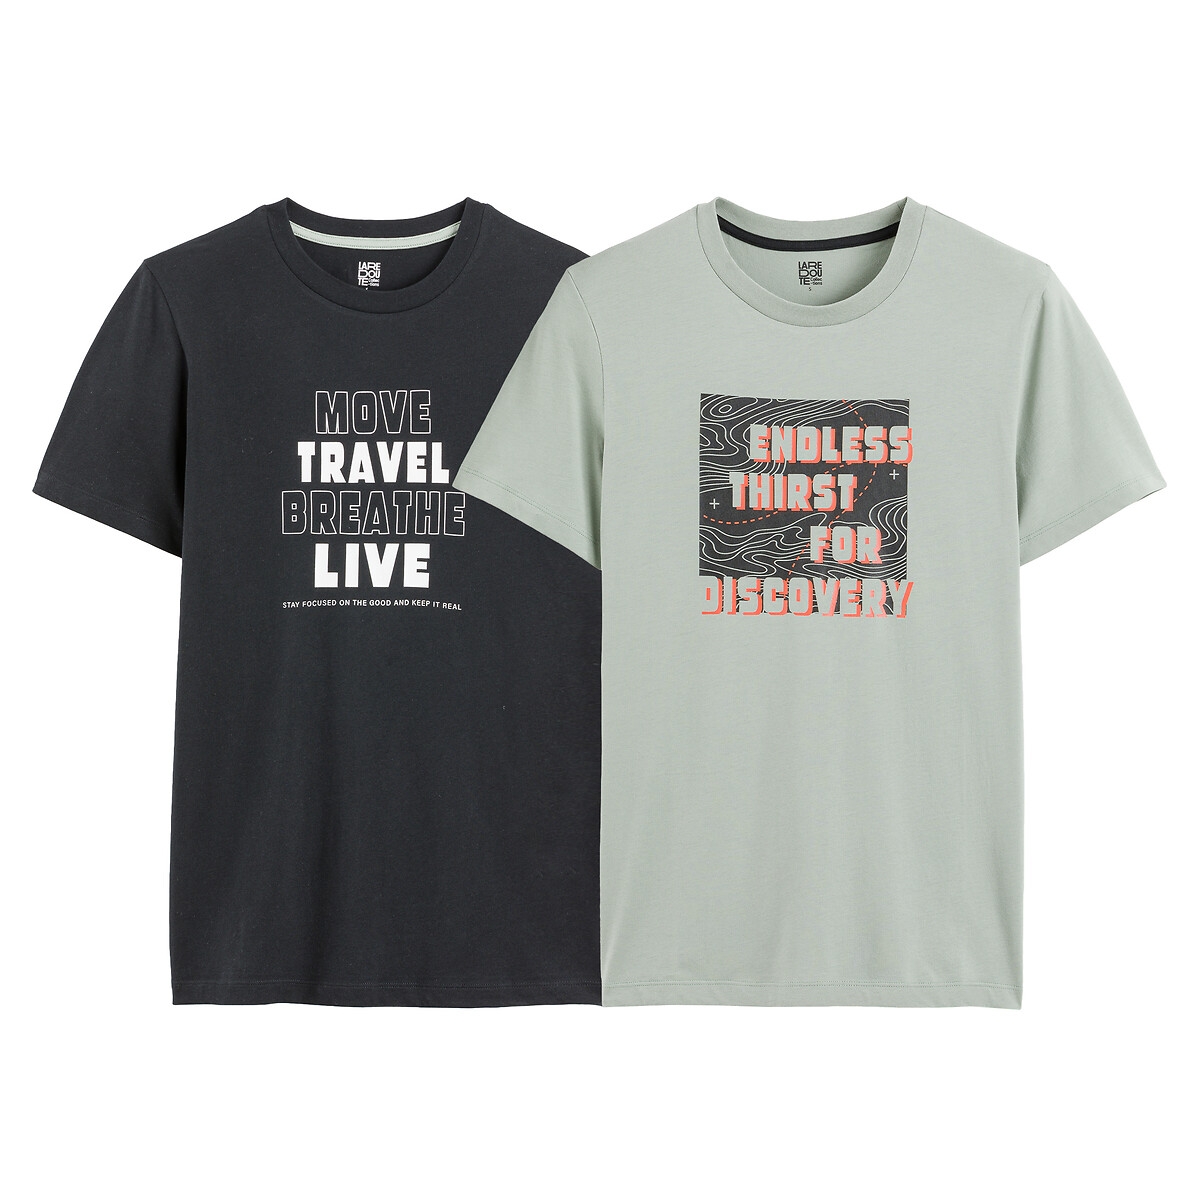 Pack of 2 T-Shirts in Cotton with Slogan Print